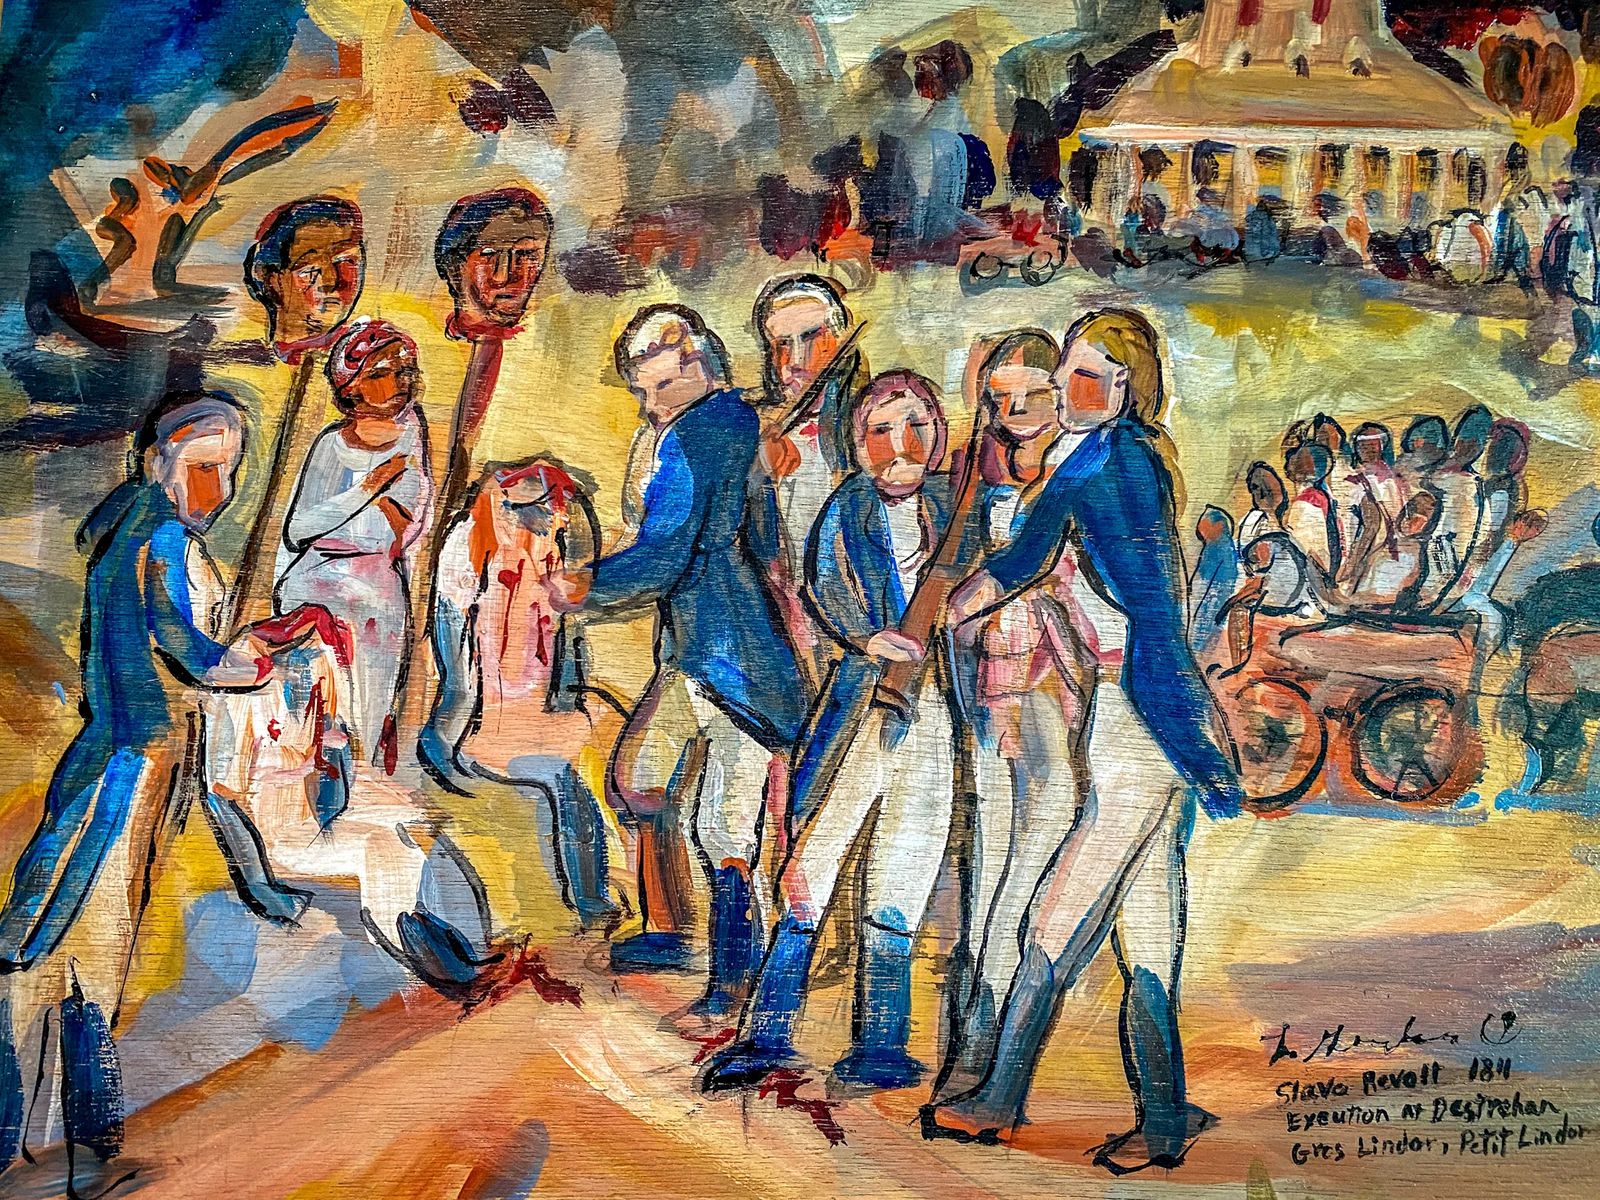 Painting of Beheaded slaves in front of Destrehan Plantation